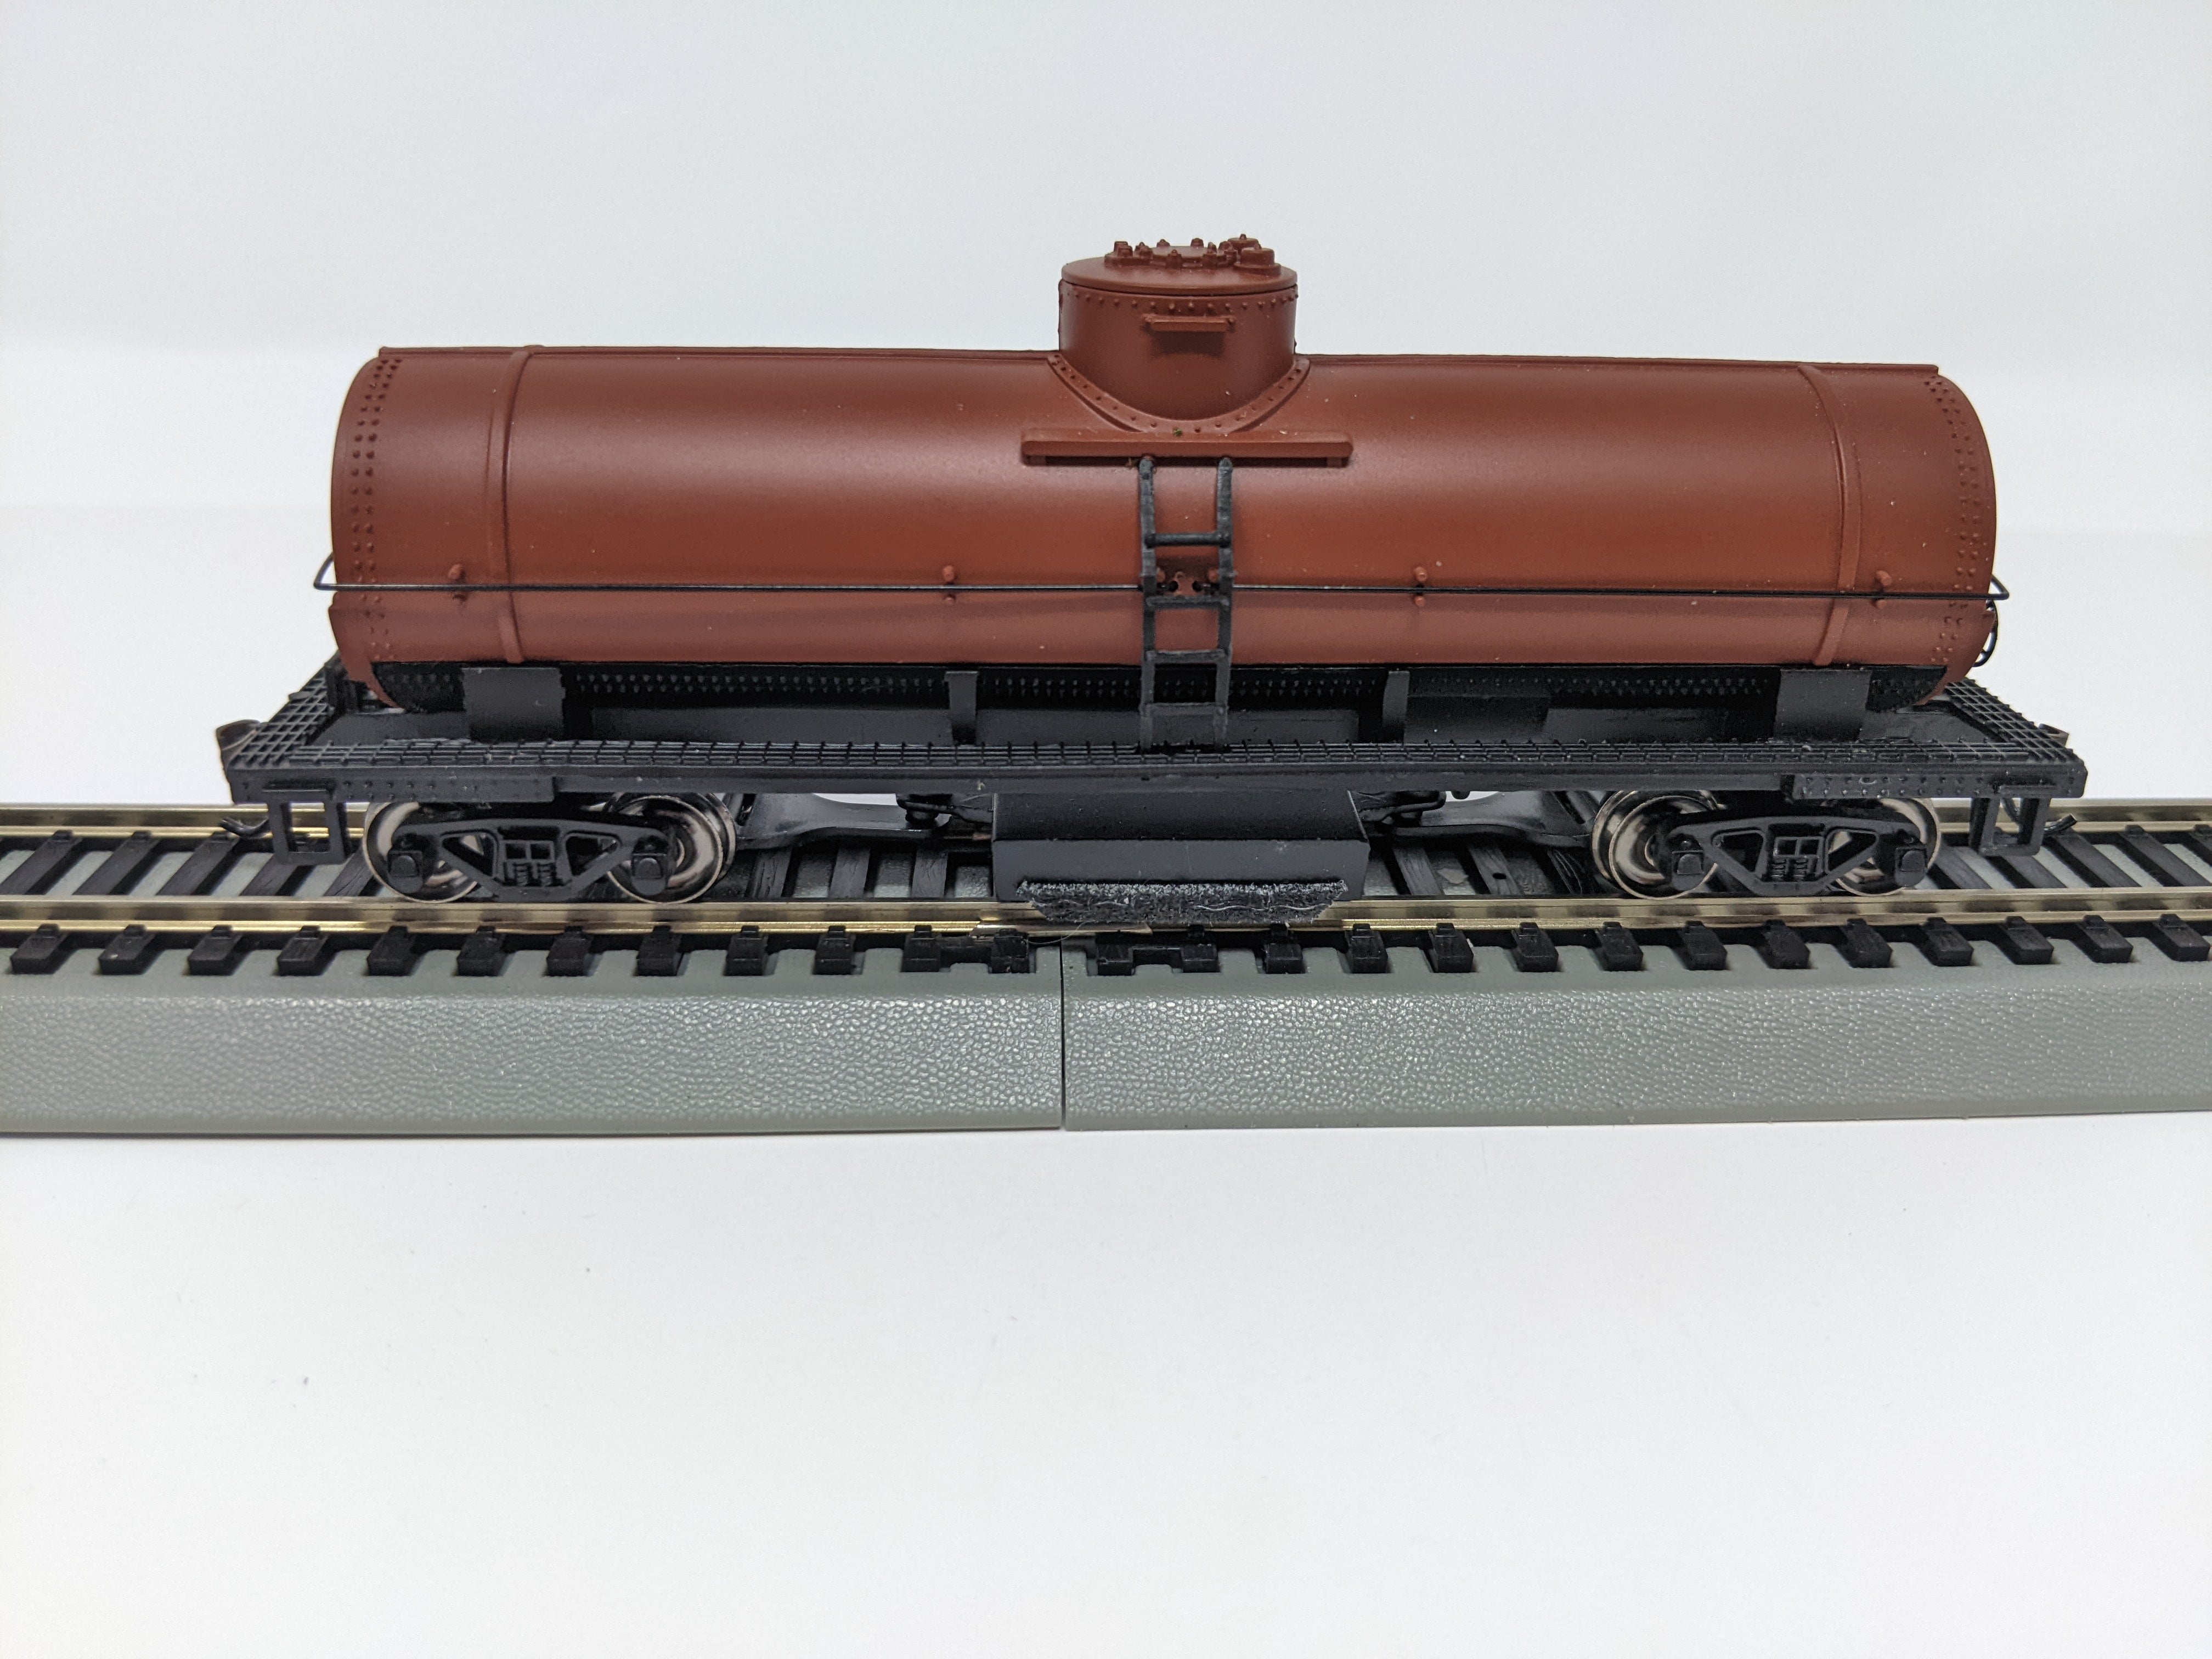 USED Bachmann 16303 HO Scale, Single Dome Tank Car, Undecorated Oxide Red , Track Cleaning